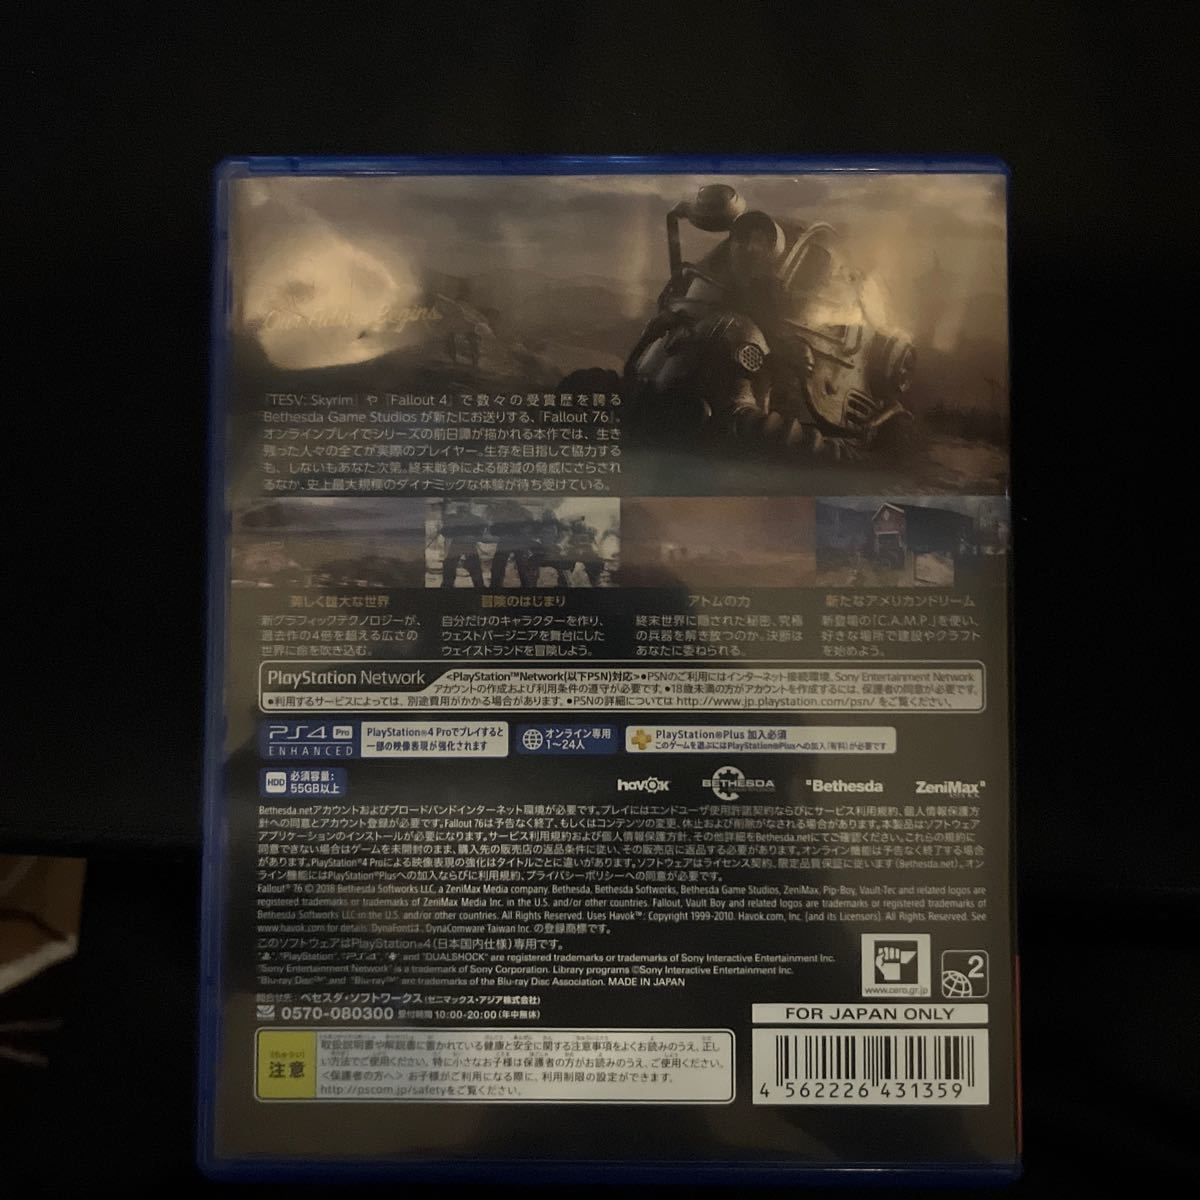 【PS4】 Fallout 76 [通常版]